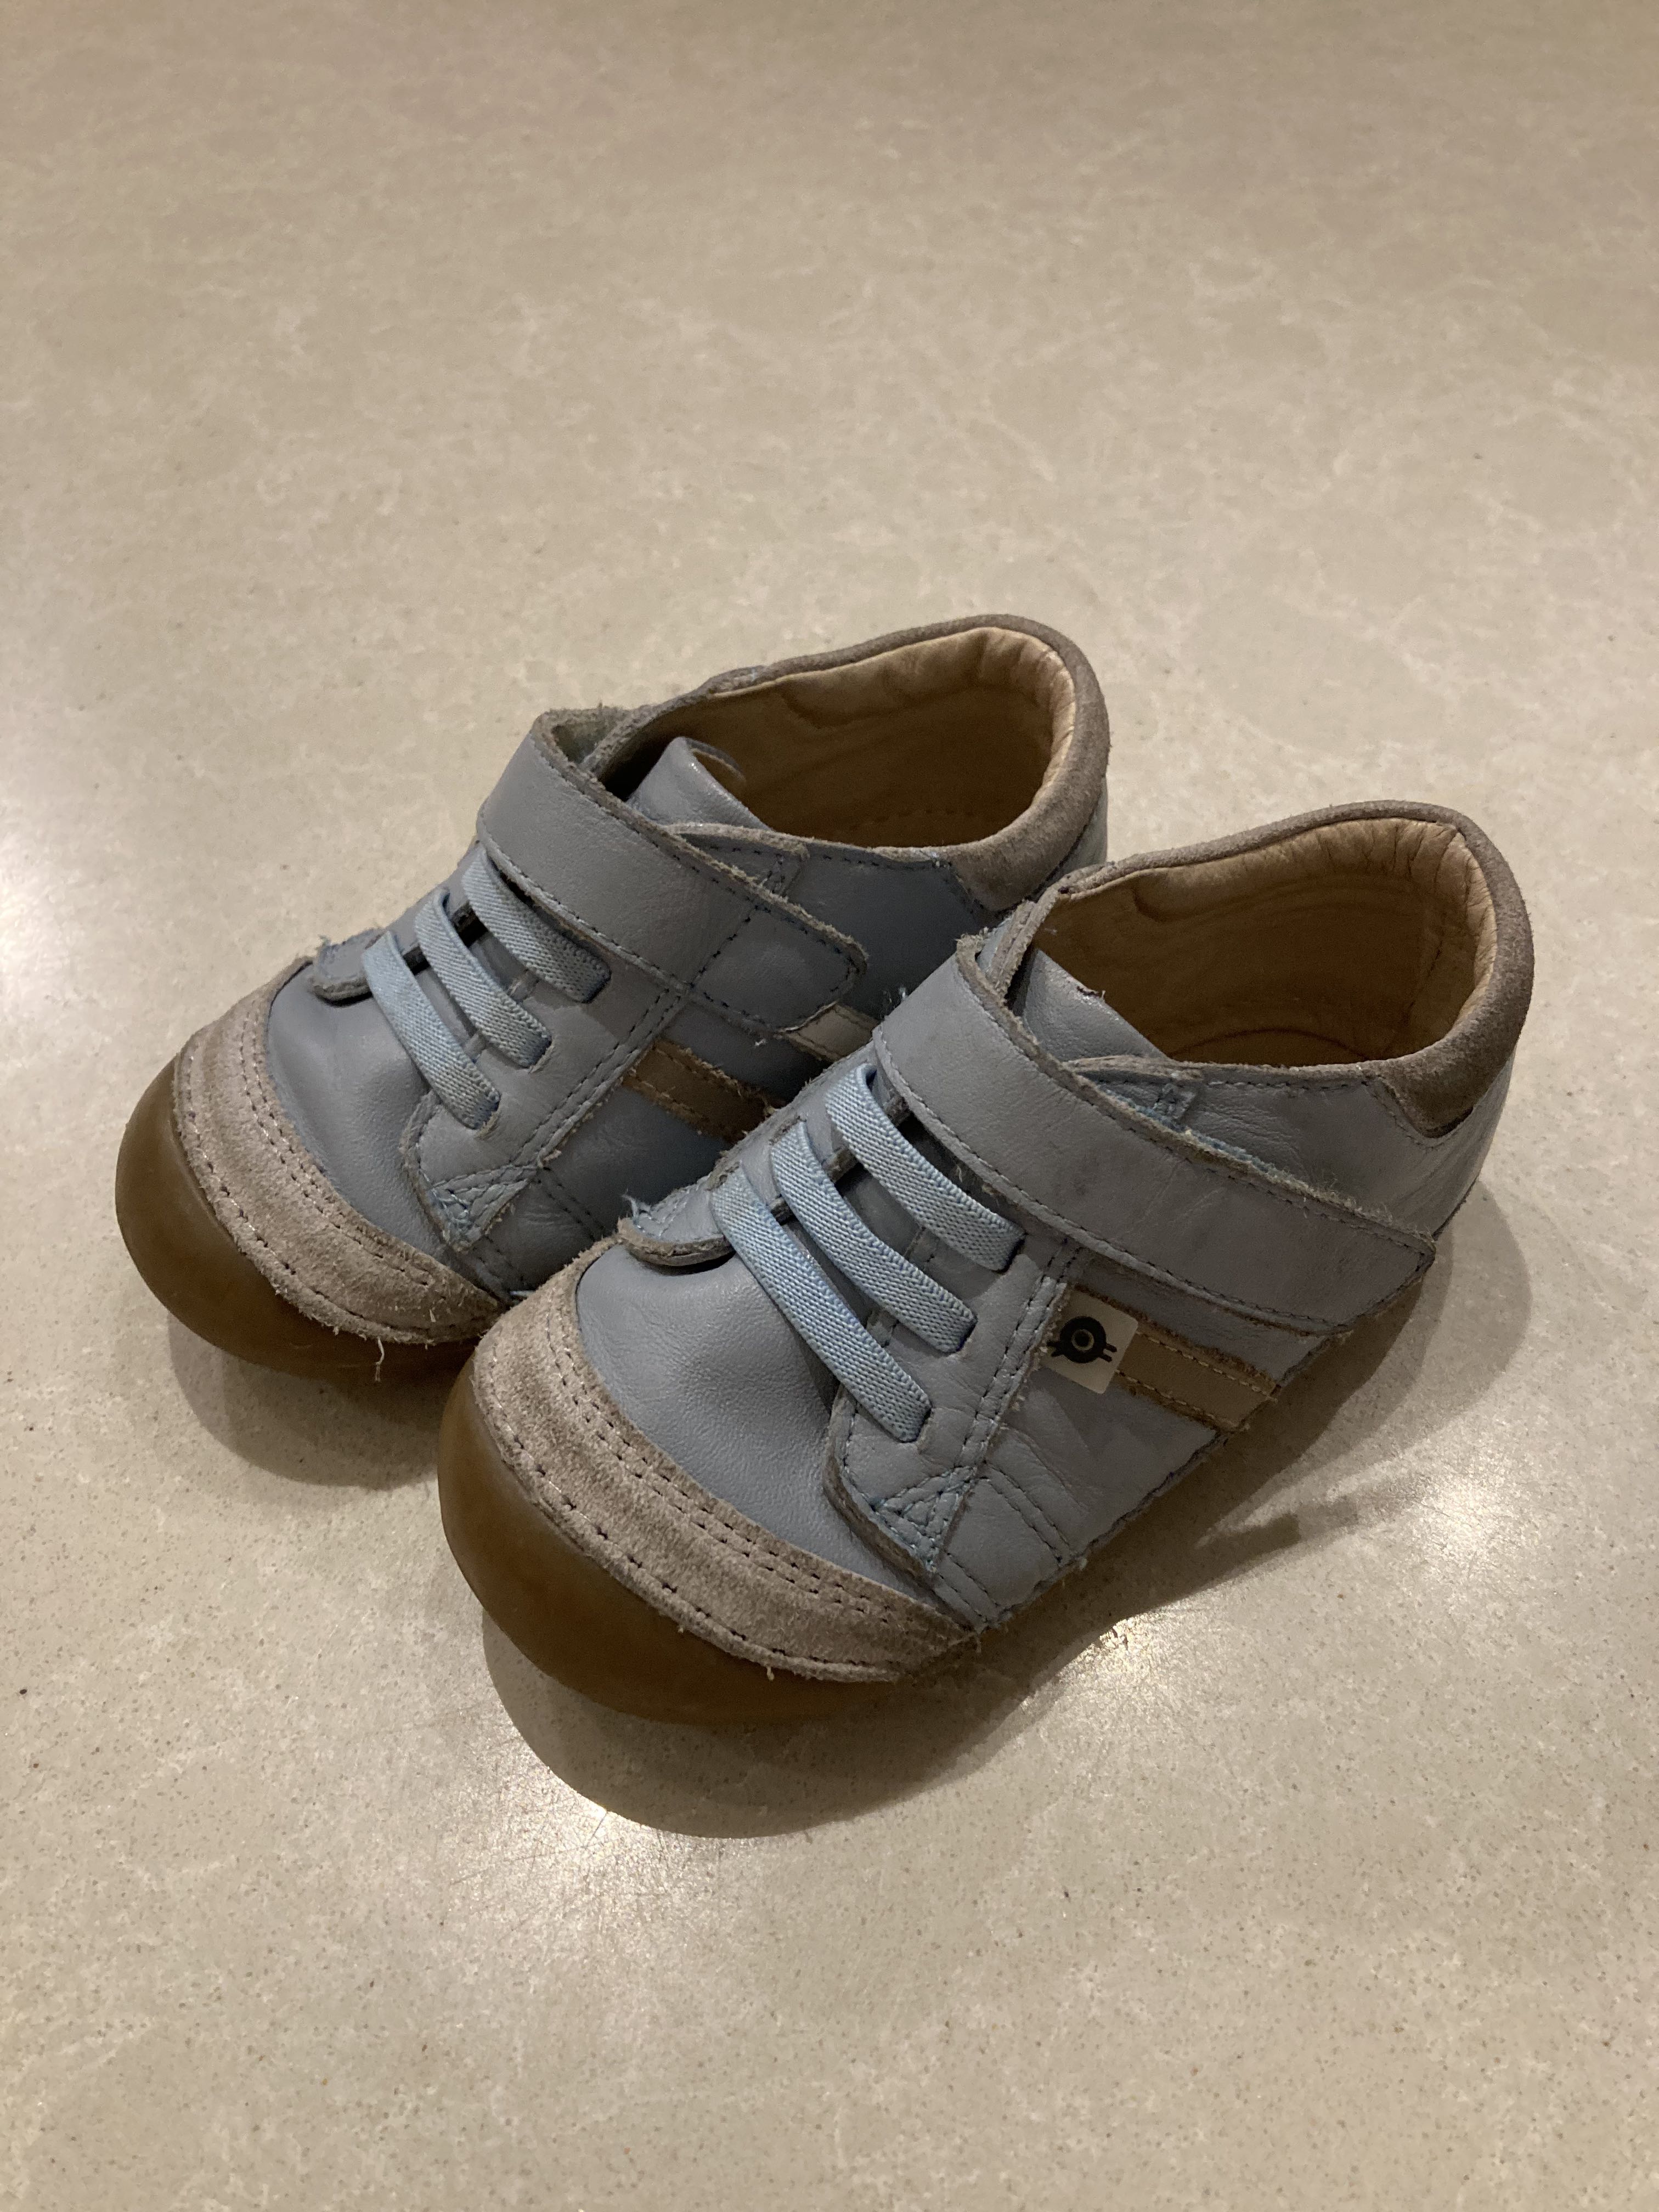 Old Soles Pave Denzle, Babies & Kids, Babies & Kids Fashion on Carousell